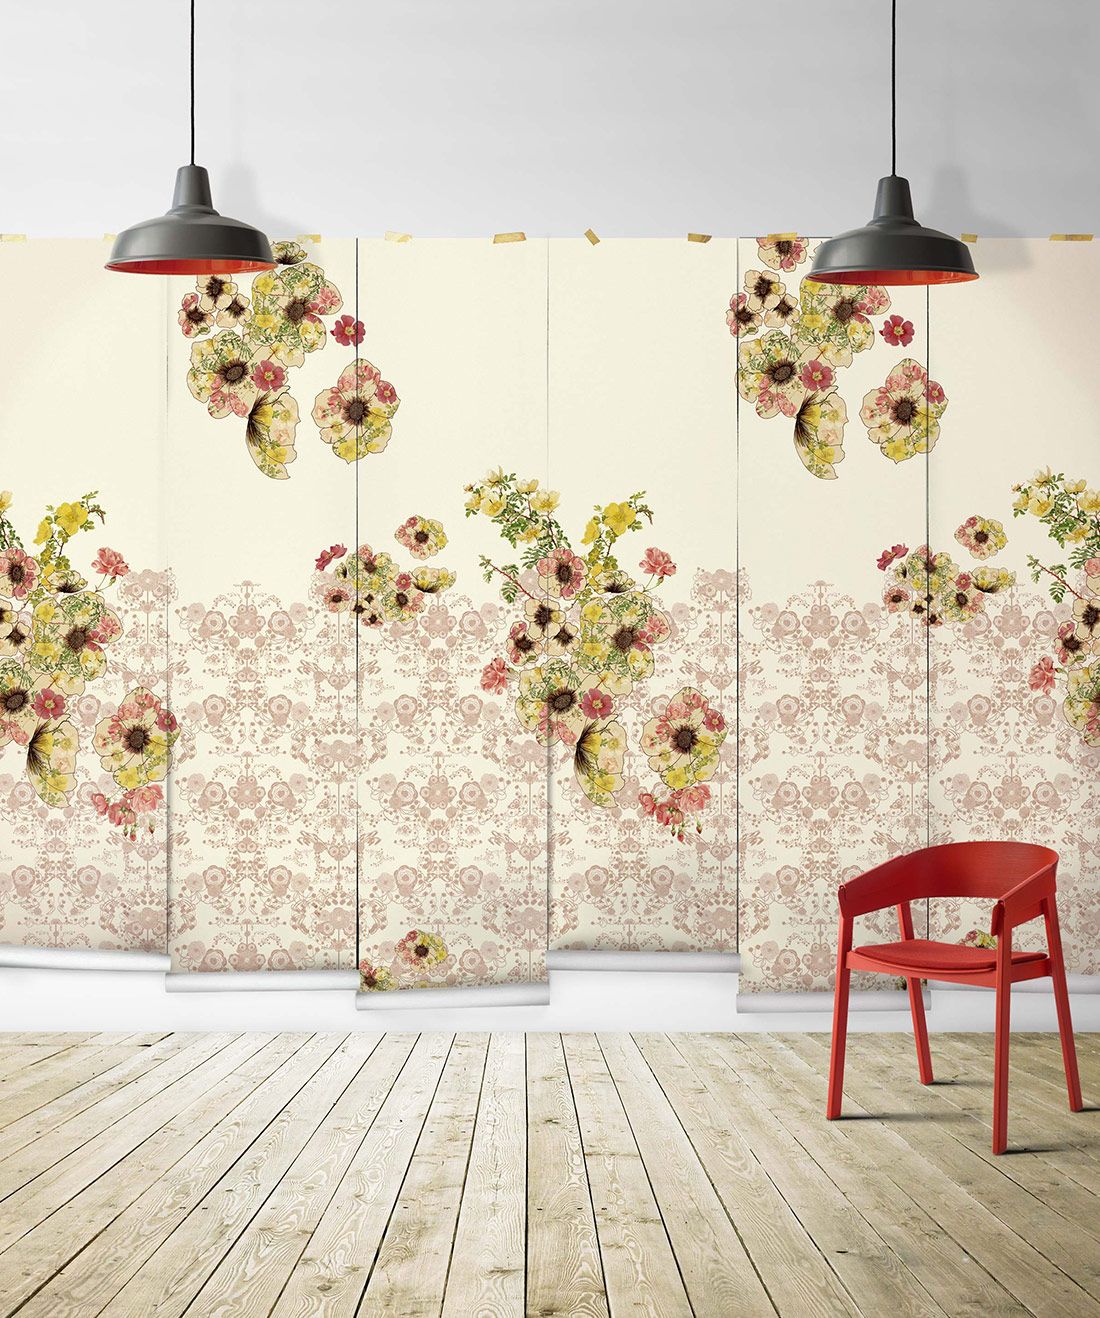 The Friday is an eclectic floral mural